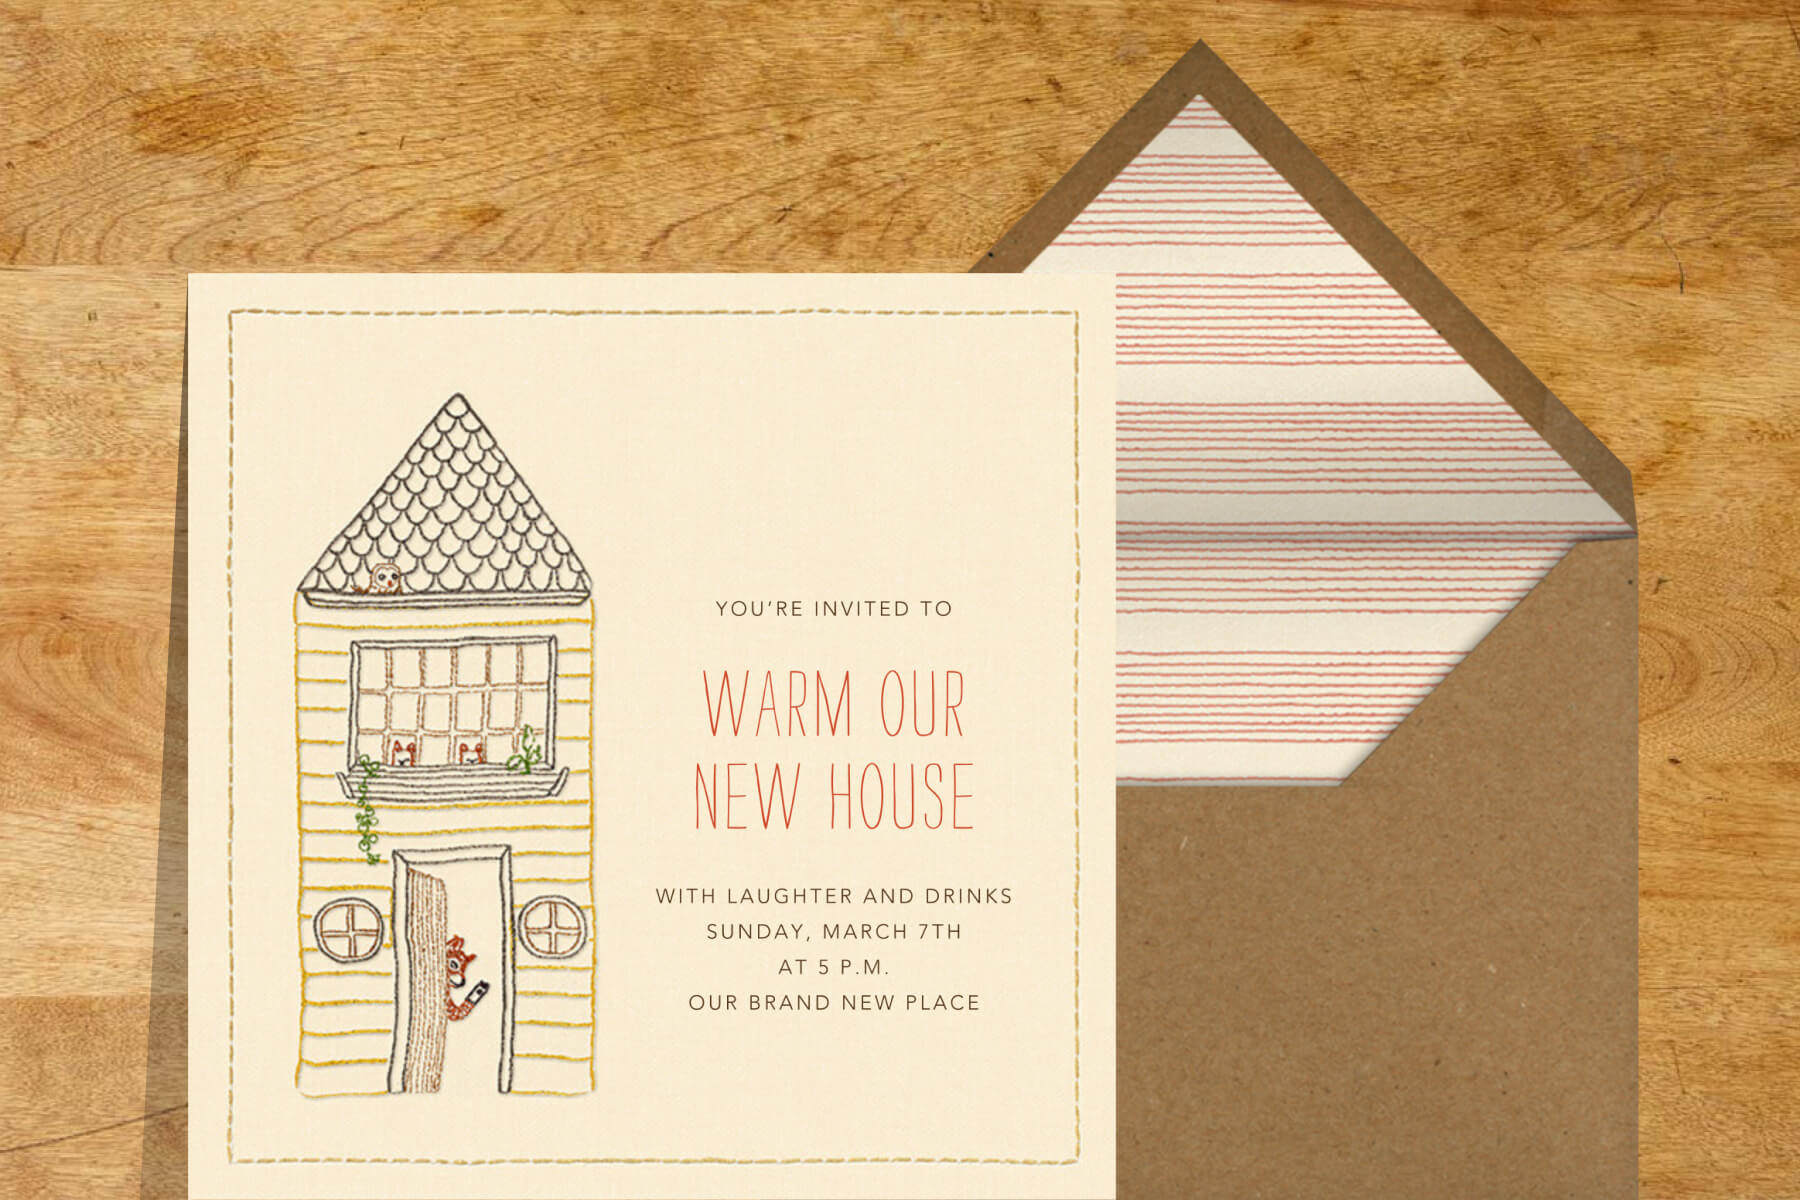 A housewarming invitation featuring an embroidered illustration of a fox waving from inside a house.